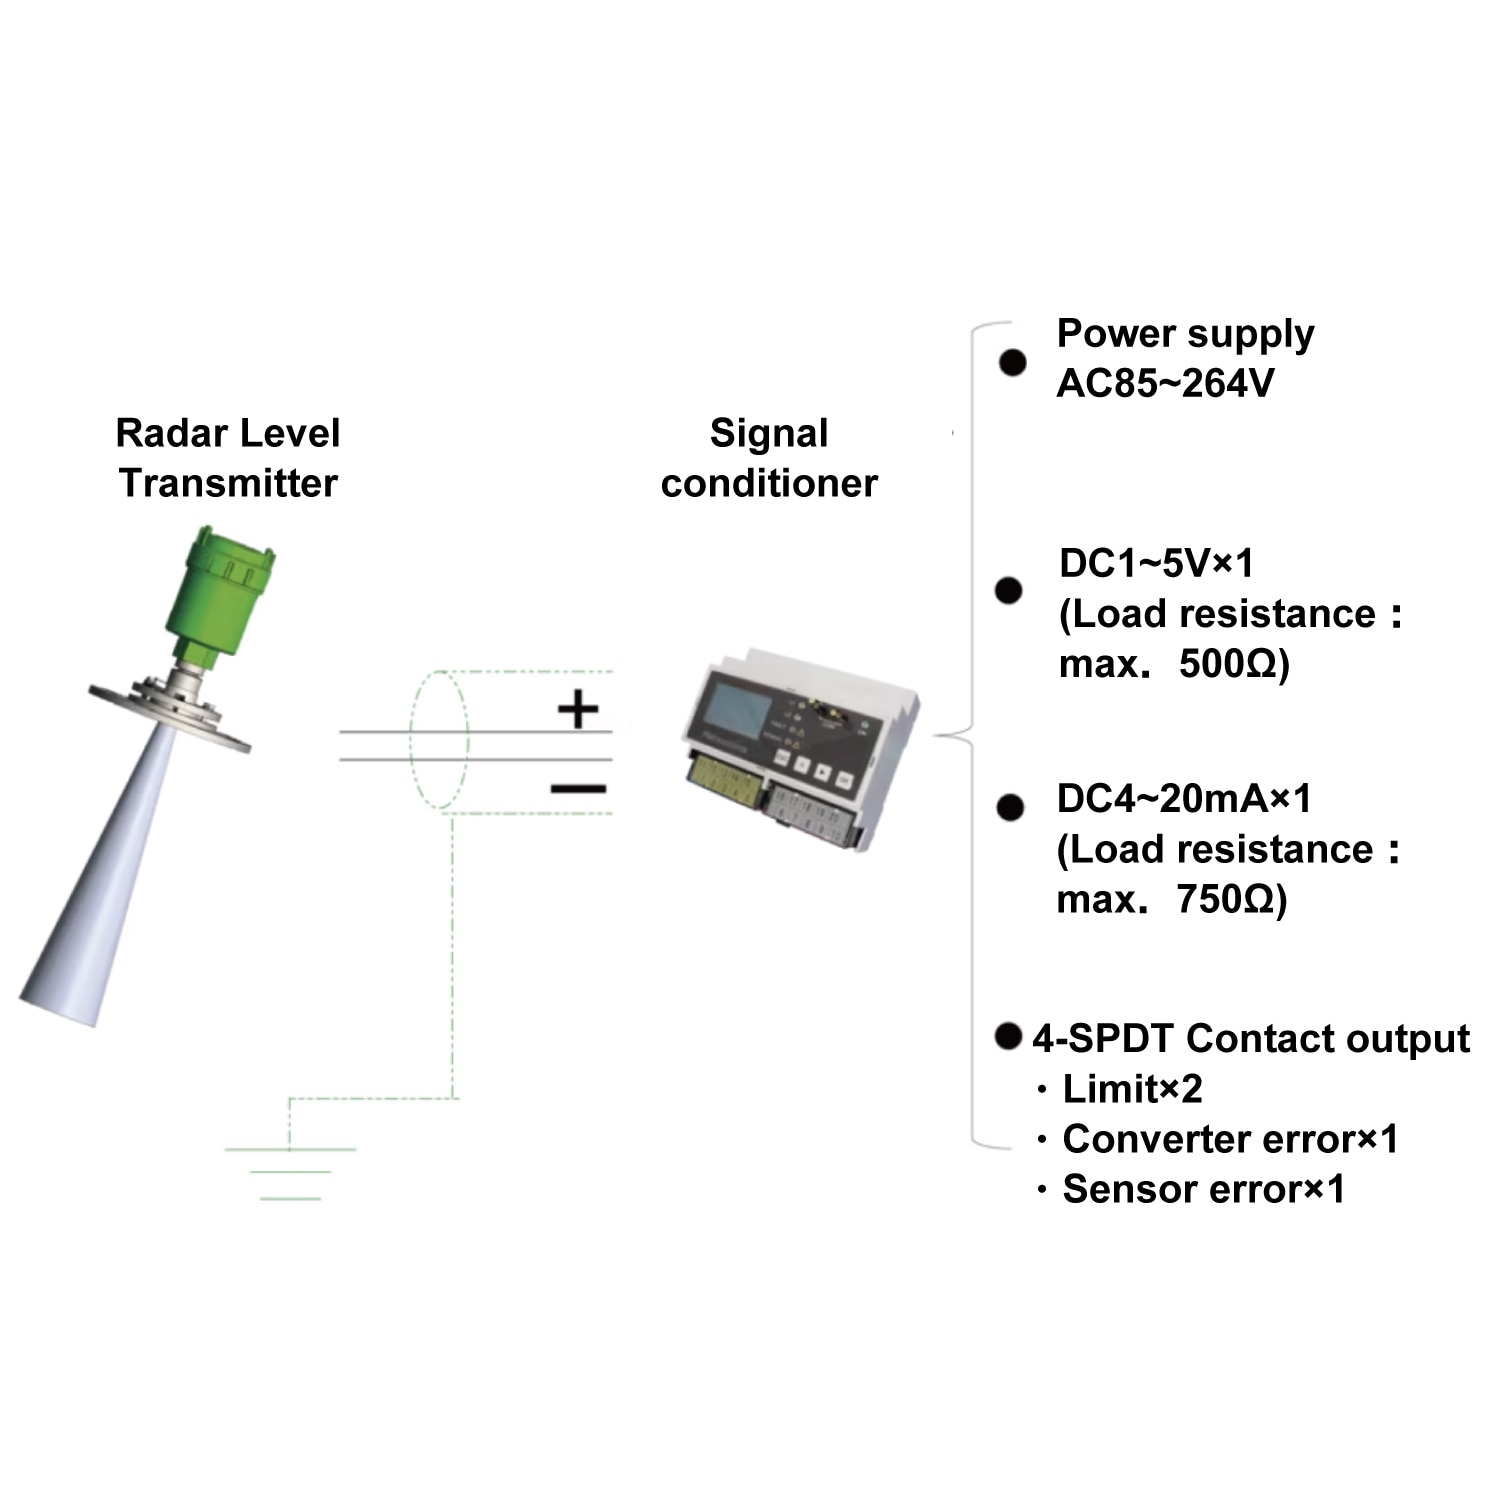 Example of connection using our Radar level transmitter.